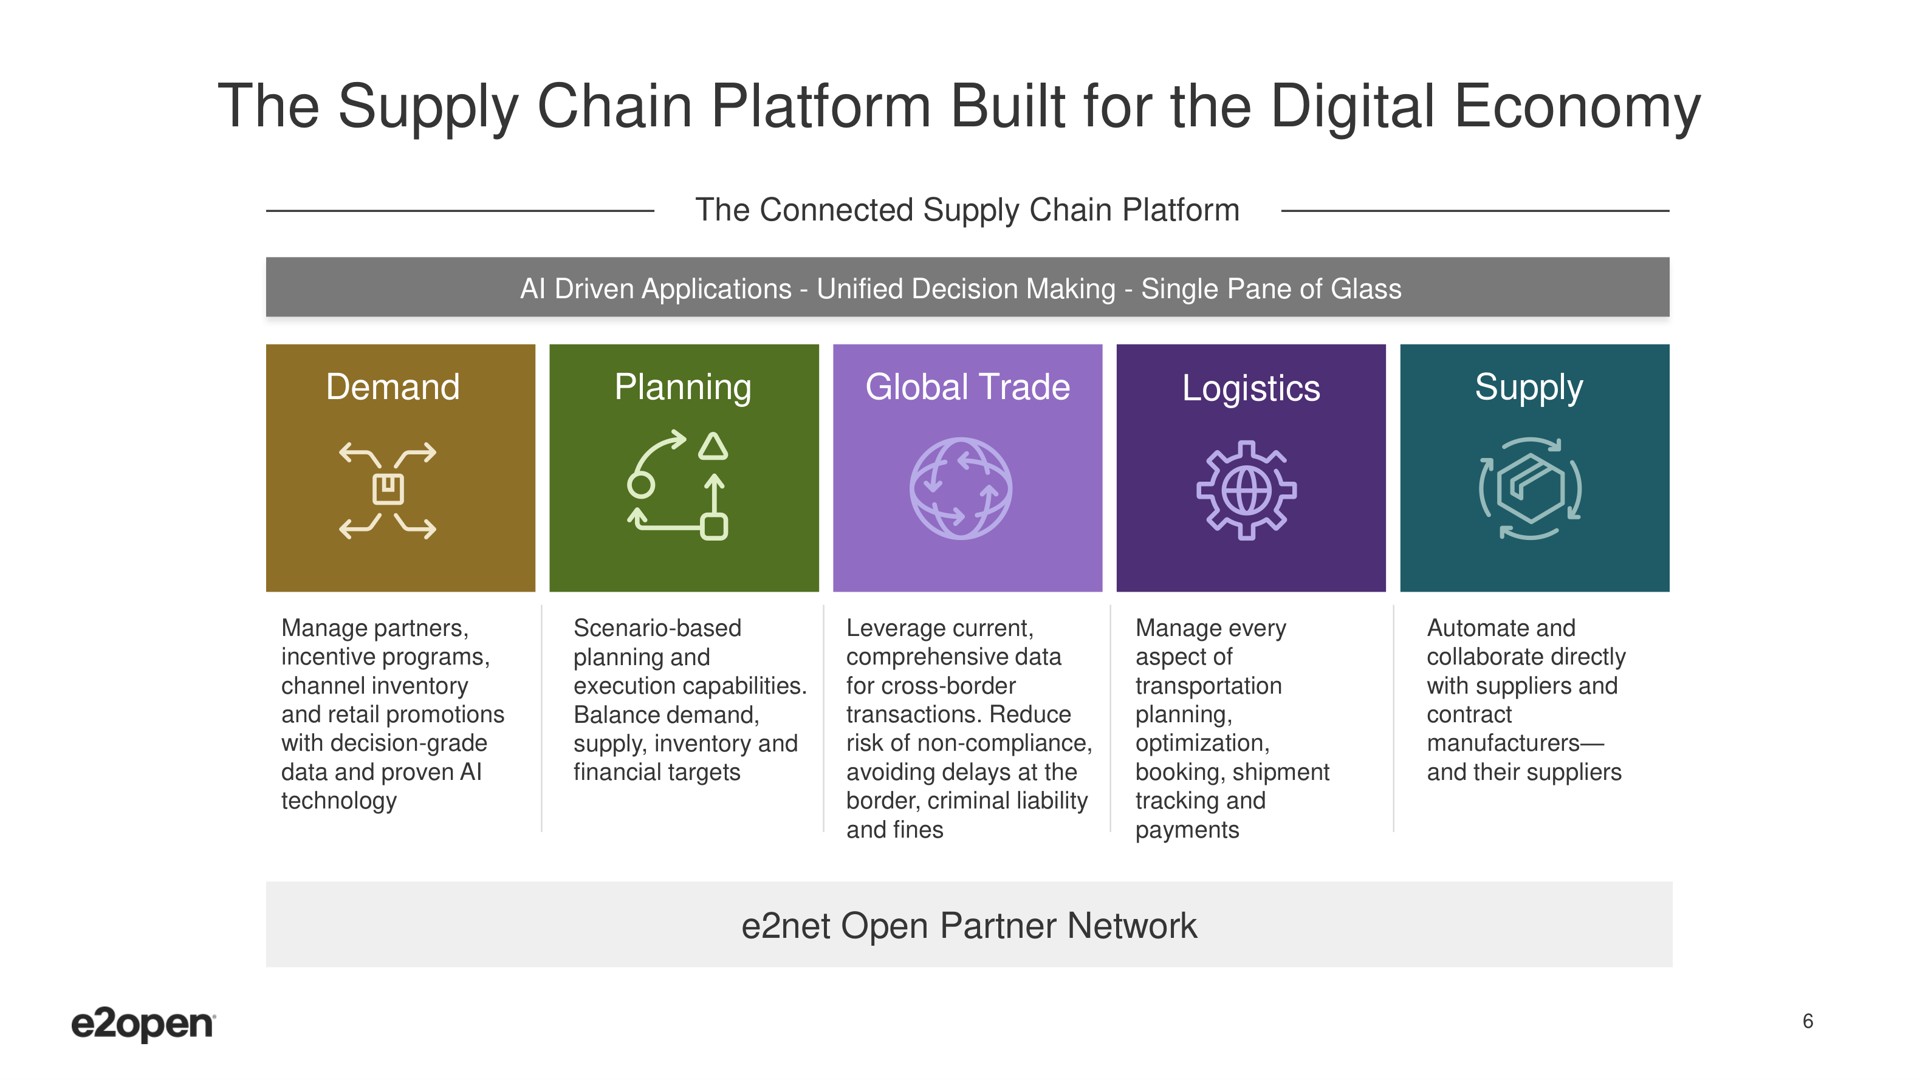 the supply chain platform built for the digital economy ran | E2open